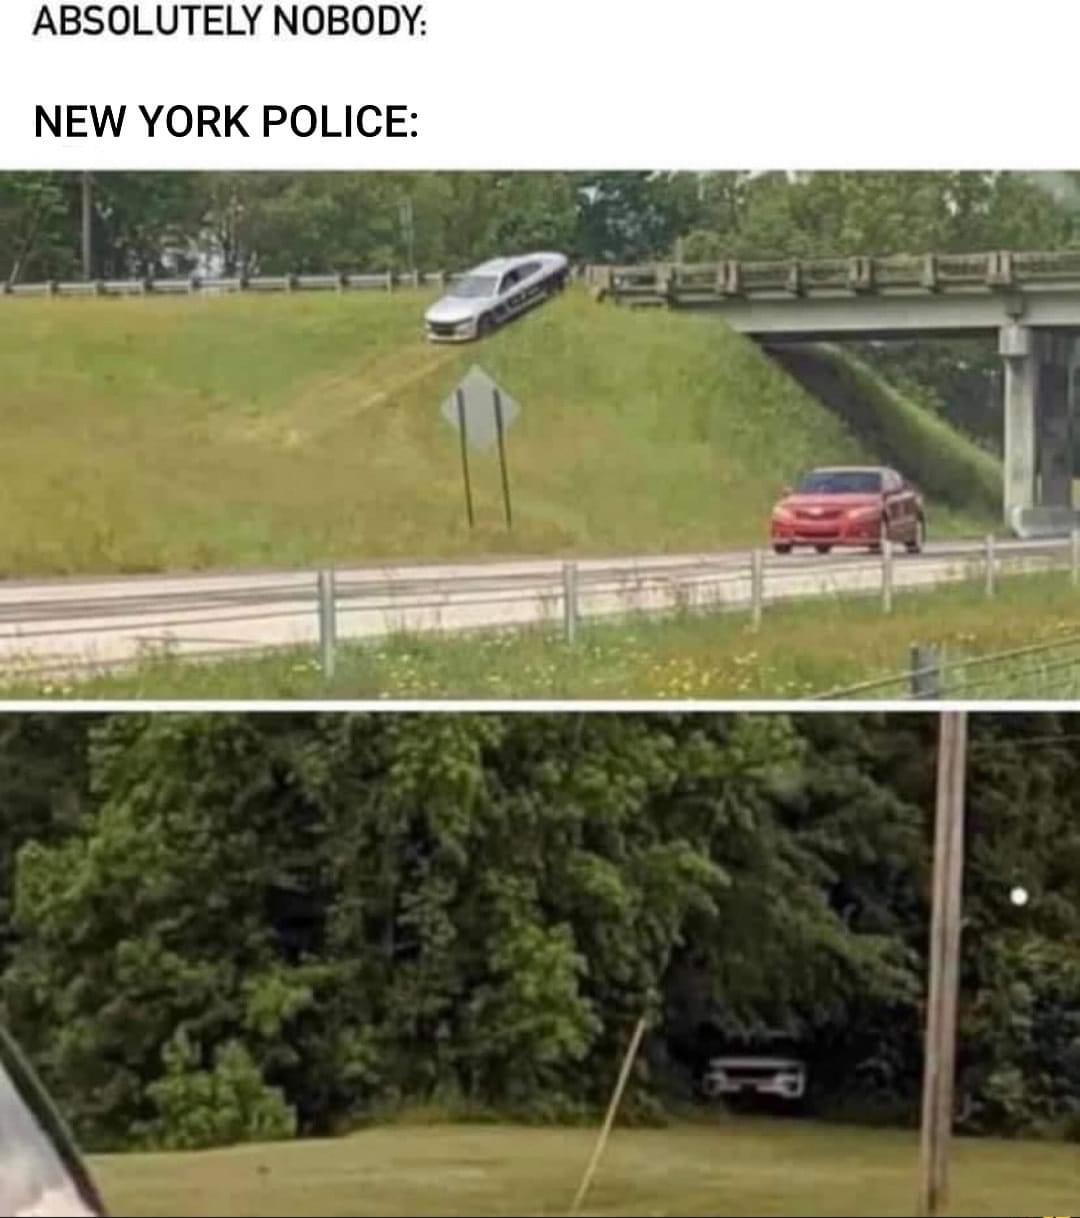 funny memes - Absolutely Nobody New York Police